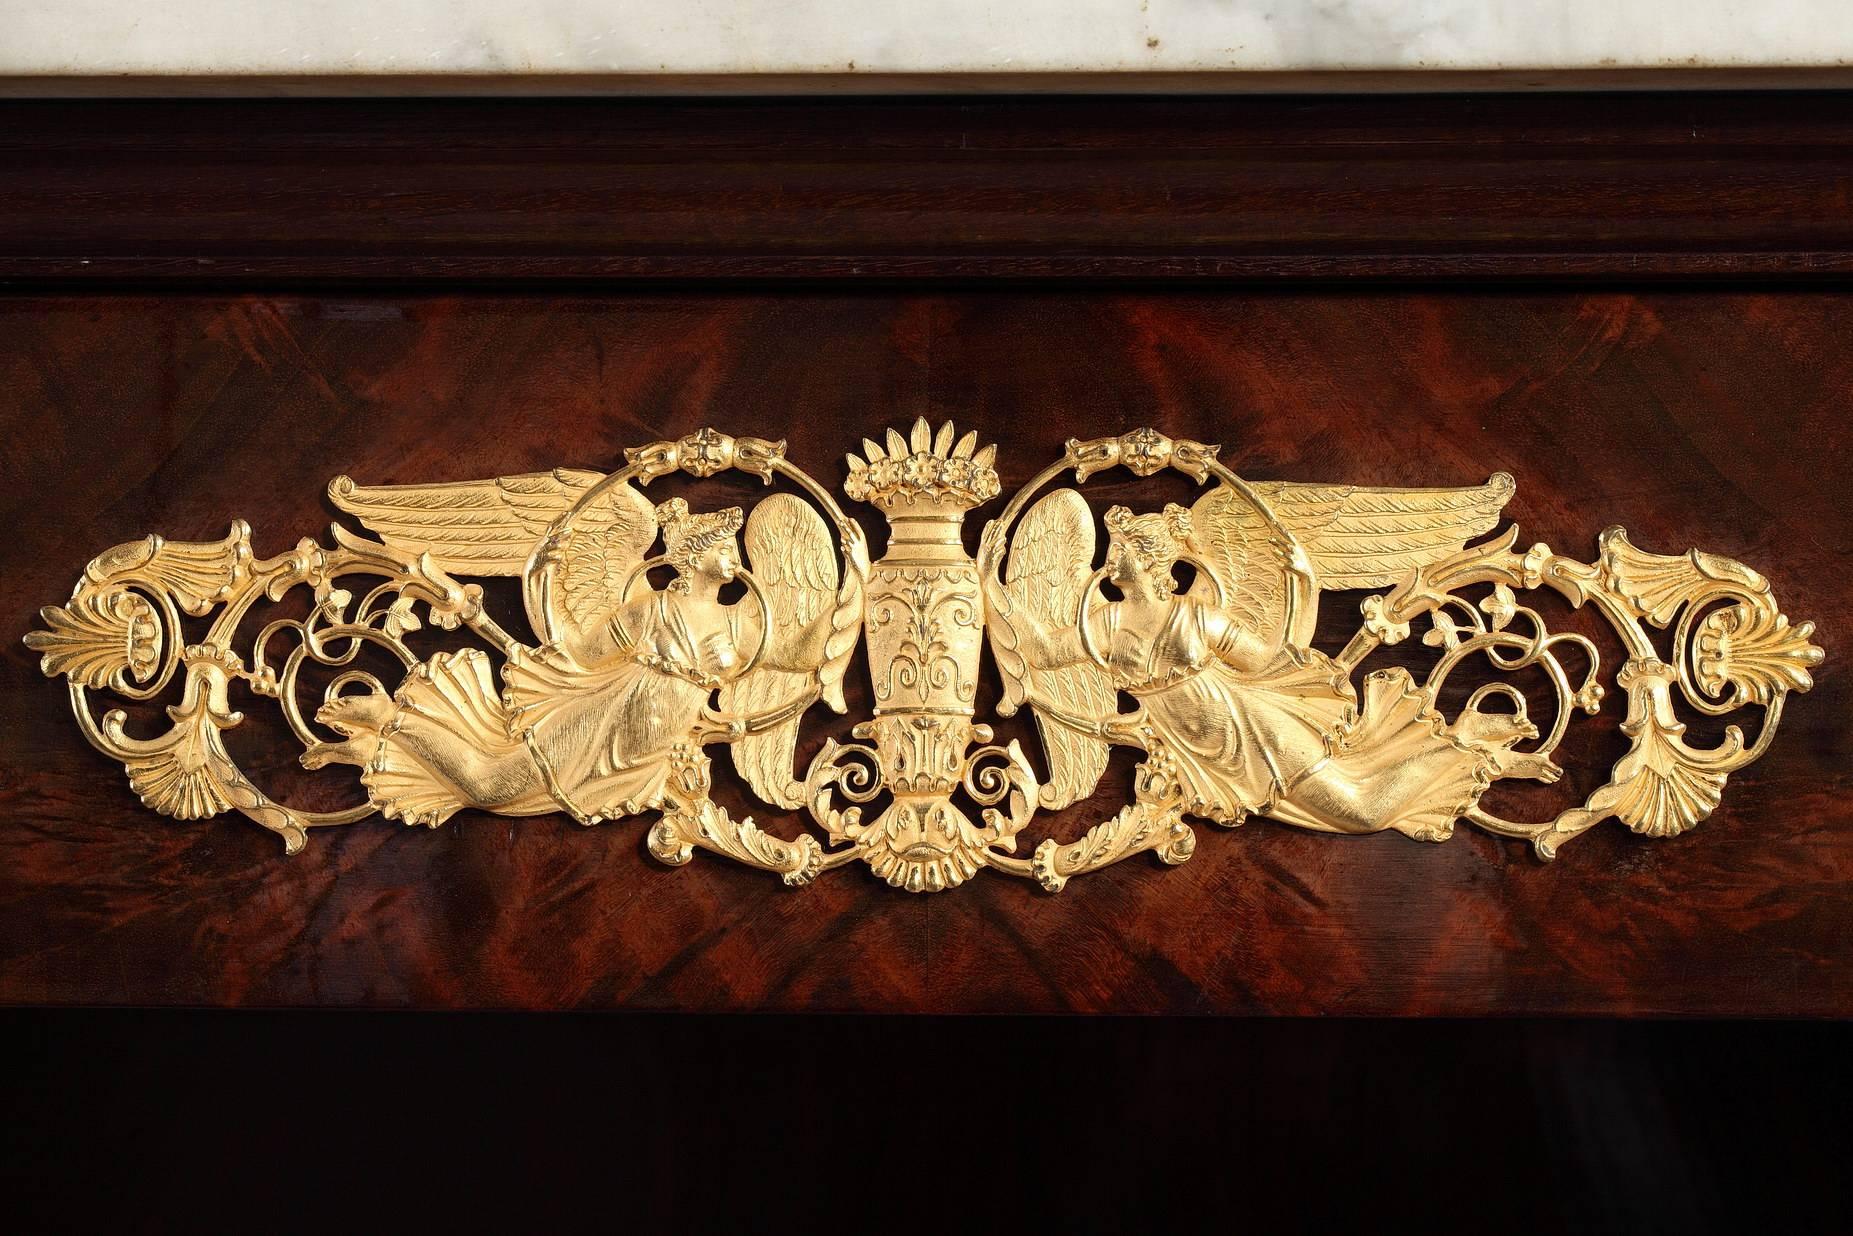 An exquisite Empire mahogany console set on two straight legs in the back and two swirl shape legs in the front, ending with gilded bronze claw feet.
This console has a drawer, it is topped with a white marble top and decorated with beautifully